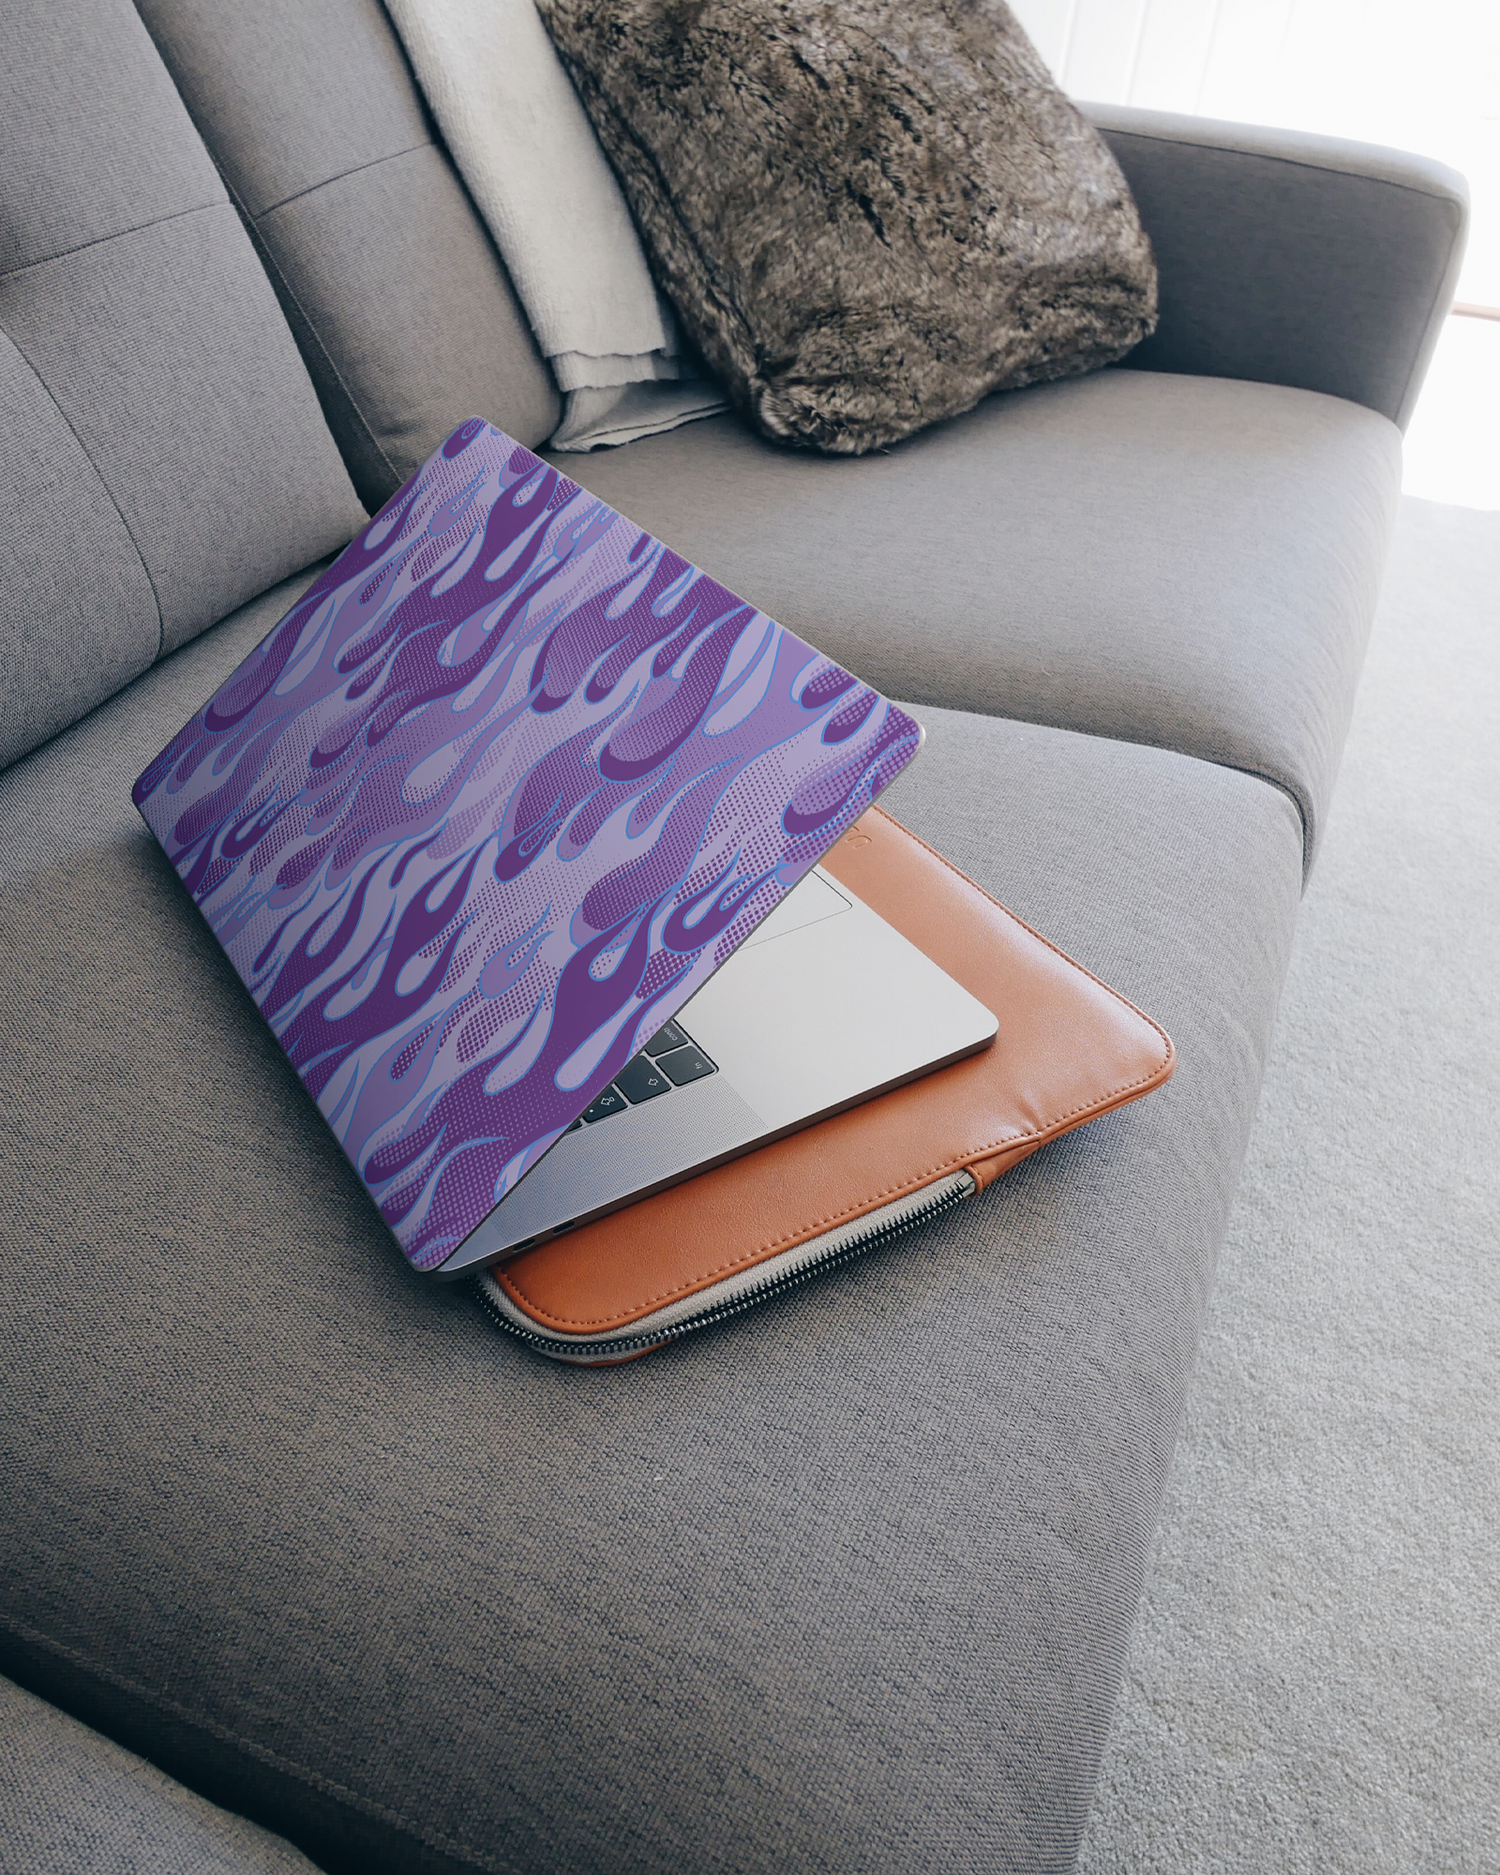 Purple Flames Laptop Skin for 15 inch Apple MacBooks on a couch